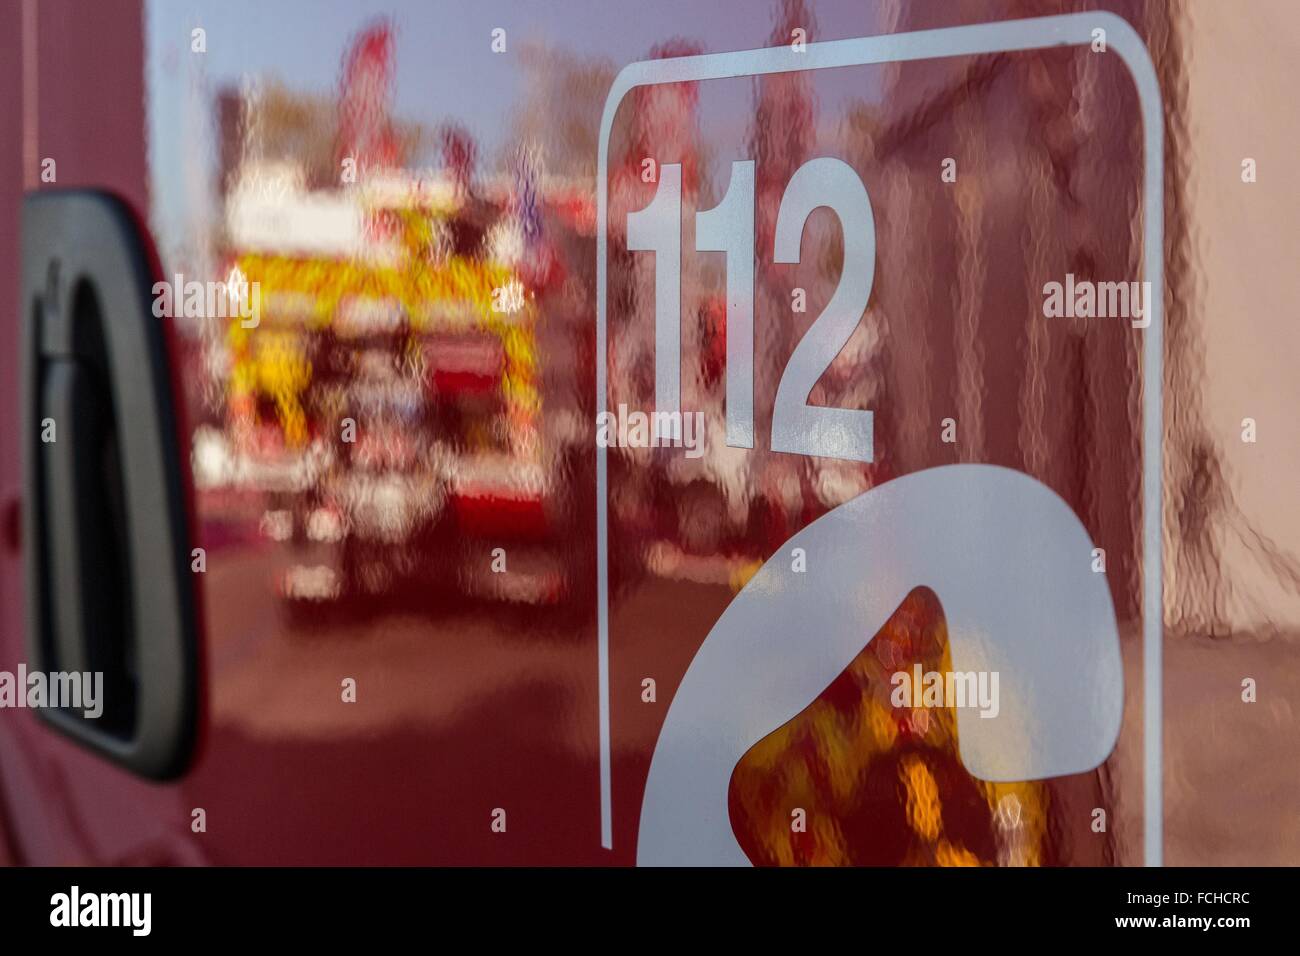 112, THE EUROPEAN EMERGENCY CALL NUMBER Stock Photo